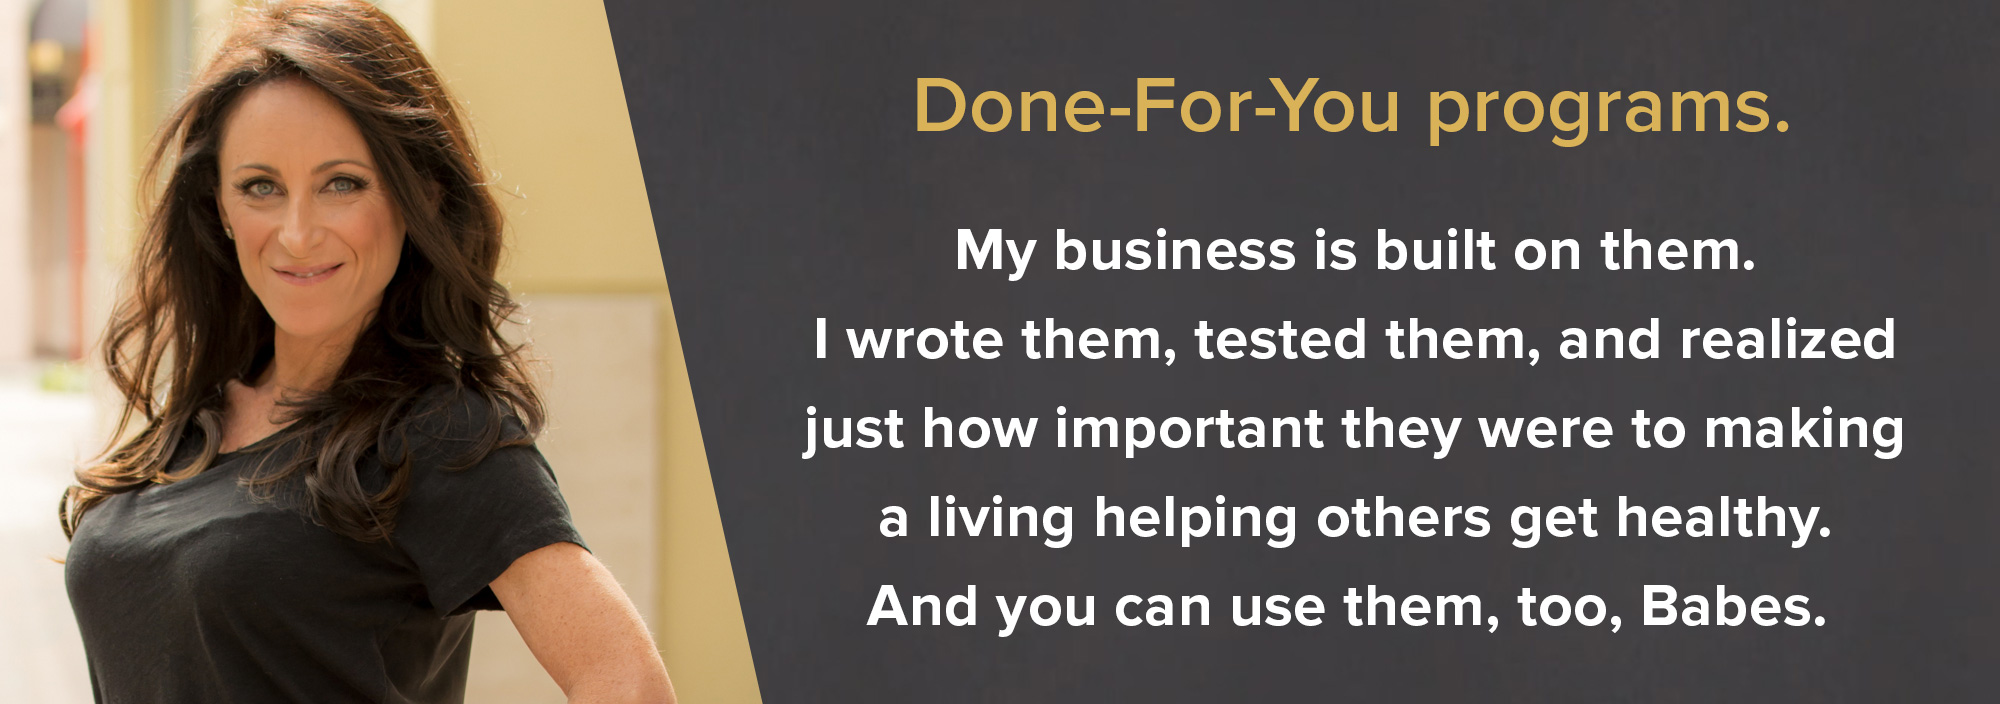  Done-For-You programs. My business is built on them. I wrote them, tested them, and realized just how important they were to making a living helping others get healthy. And you can use them, too, Babes.